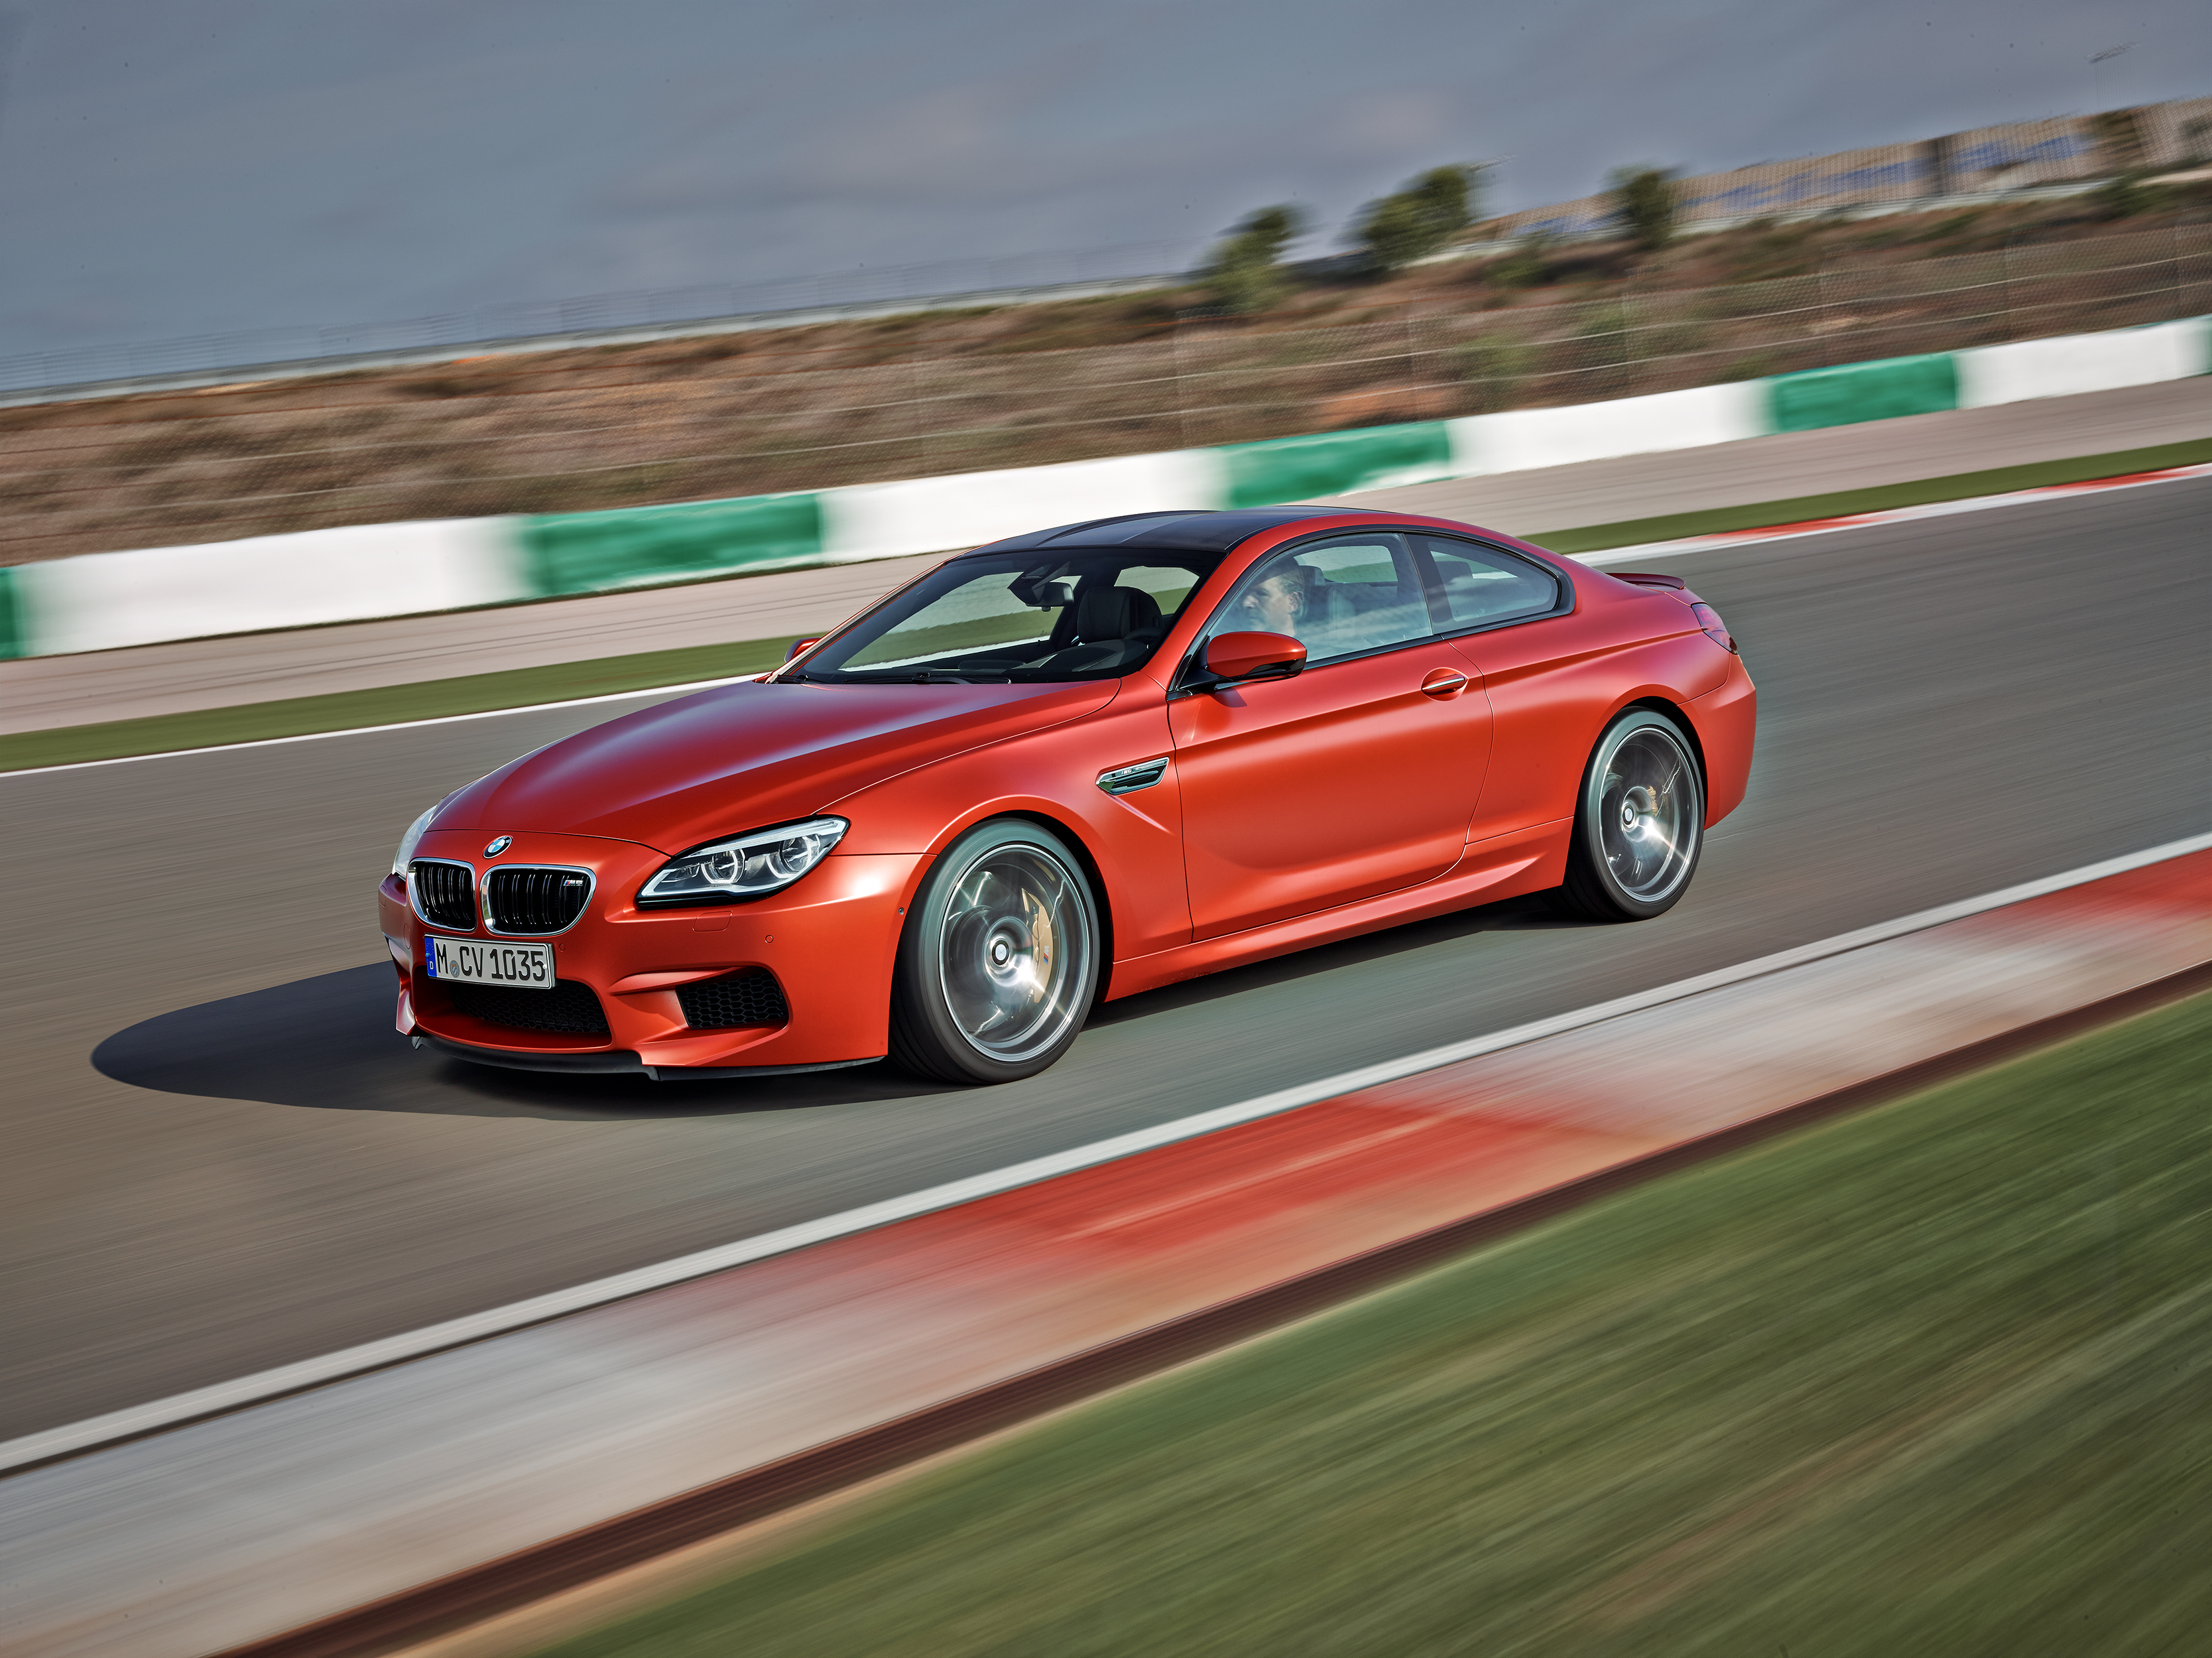 Bmw 6 m. BMW m6 Coupe. BMW m6 Coupe 2016. BMW m6 f13 Coupe. BMW m6 Coupe 2015.